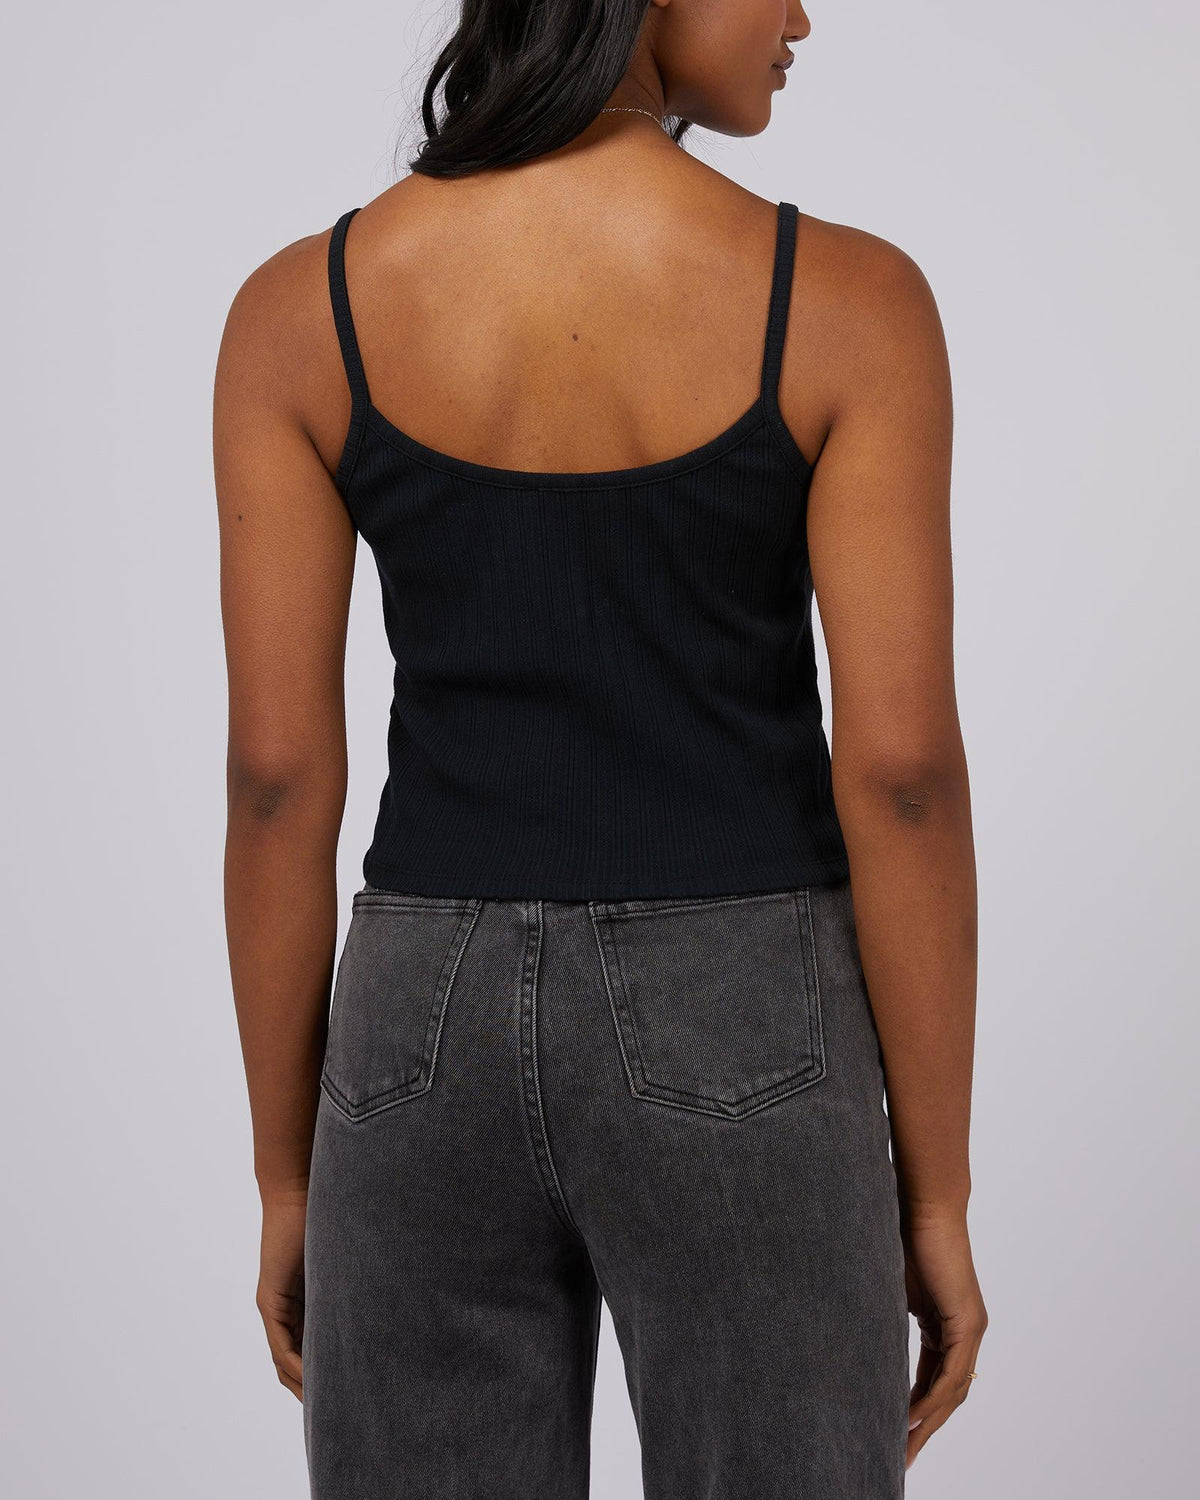 All About Eve-Caprice Tank Black-Edge Clothing